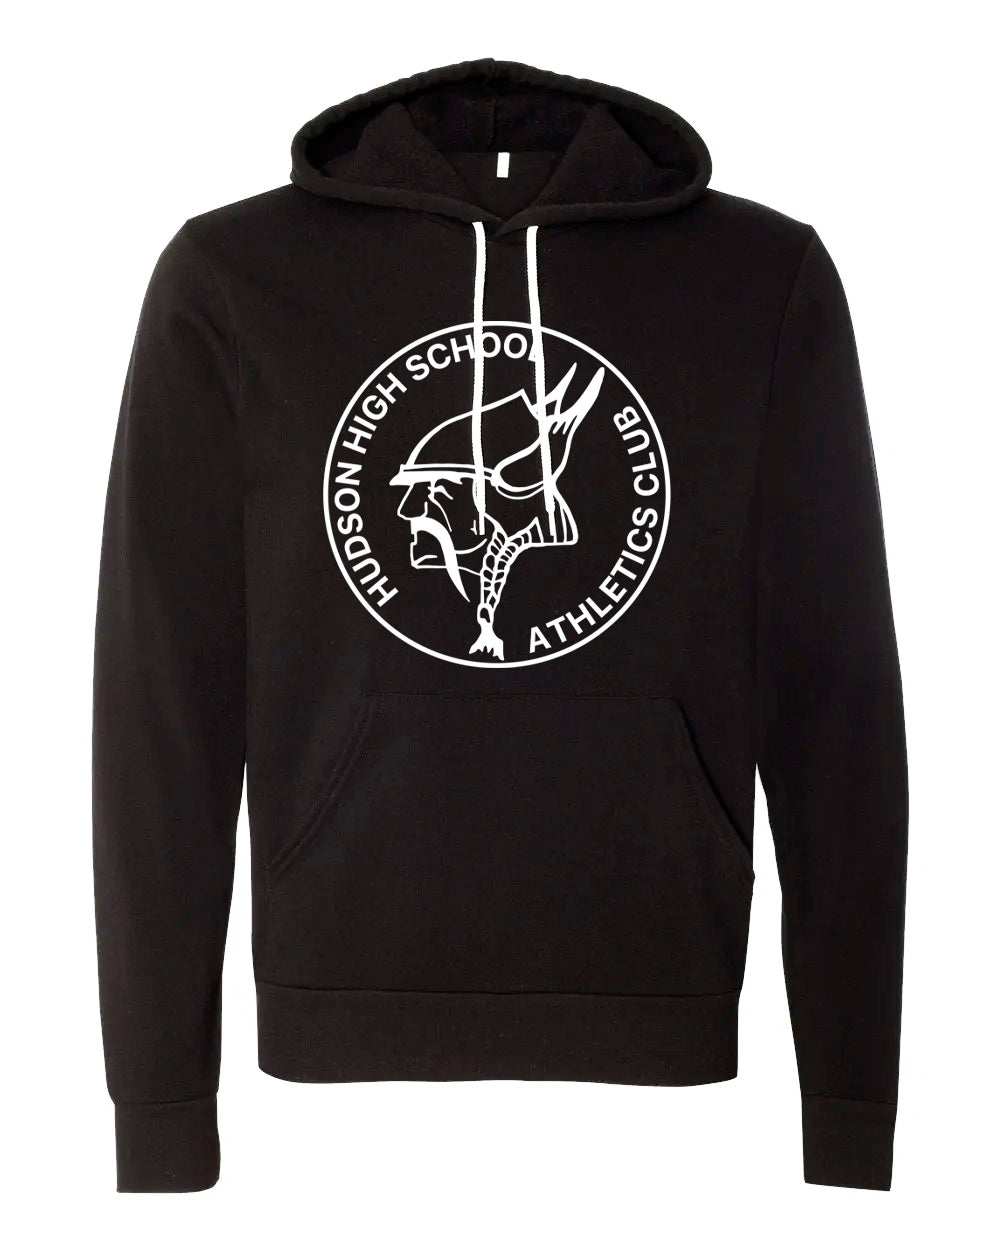 VINTAGE HHS ATHLETICS CLUB Hoodies | Unsettled Apparel